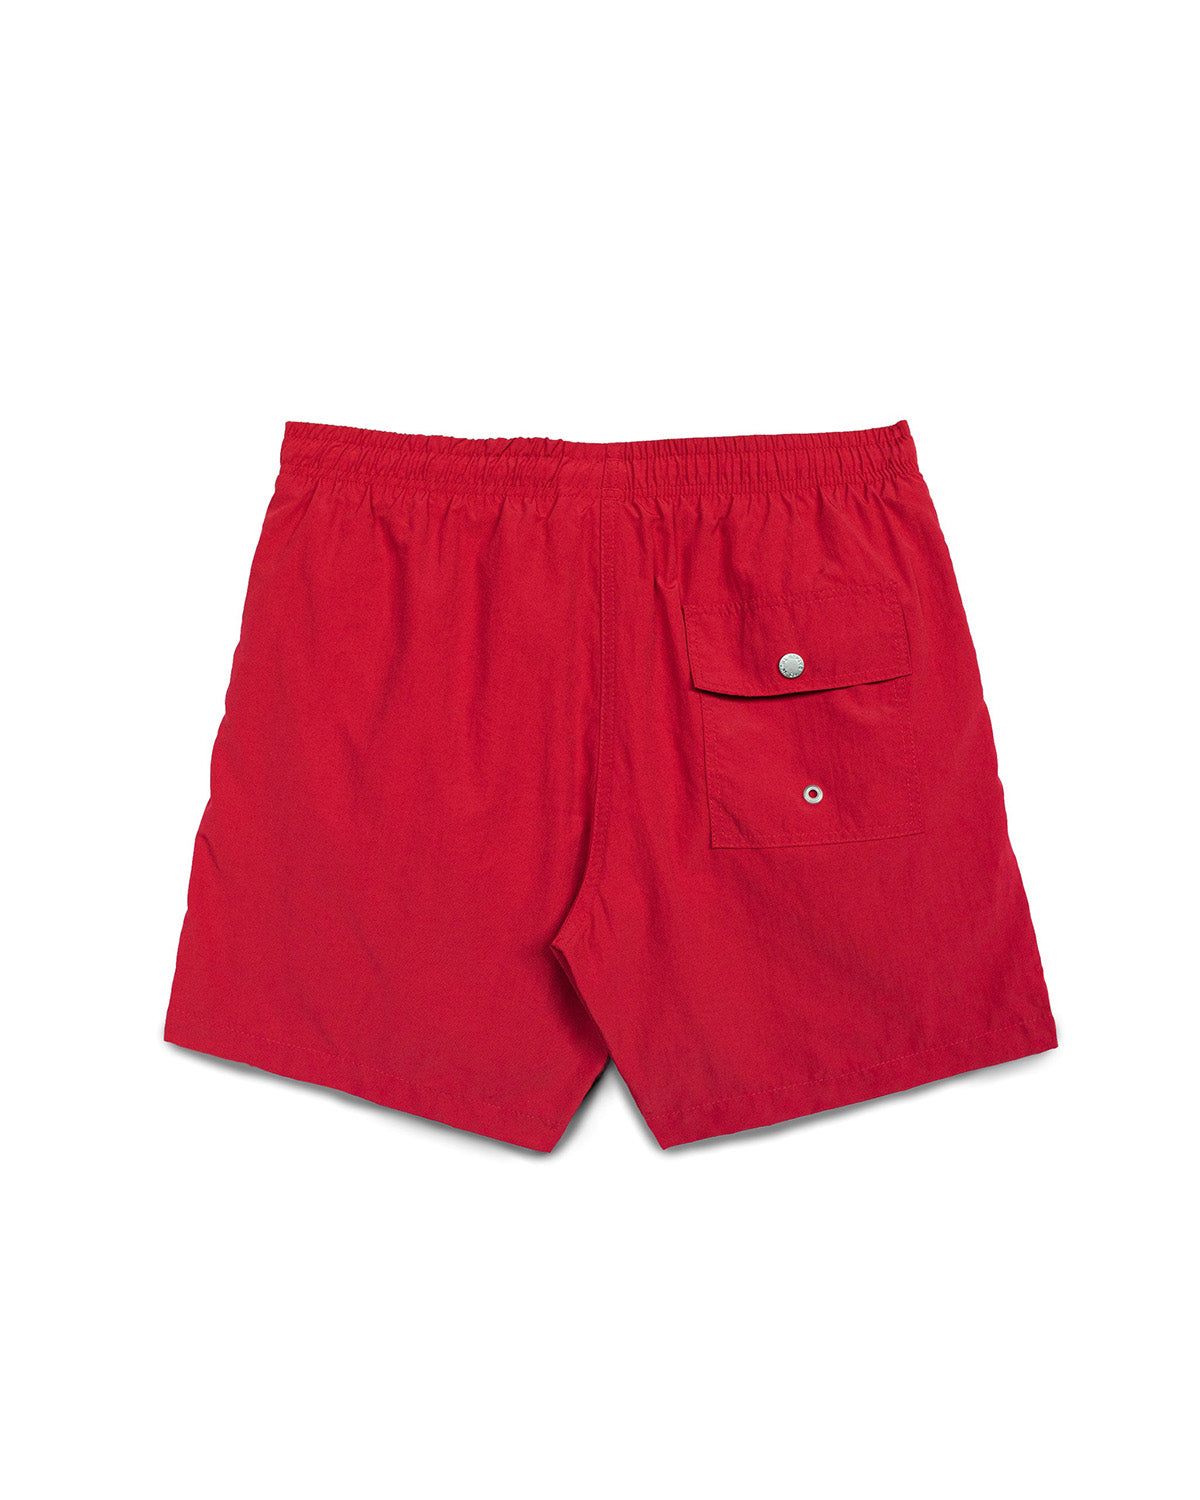 Solid Red Swim Trunk back view